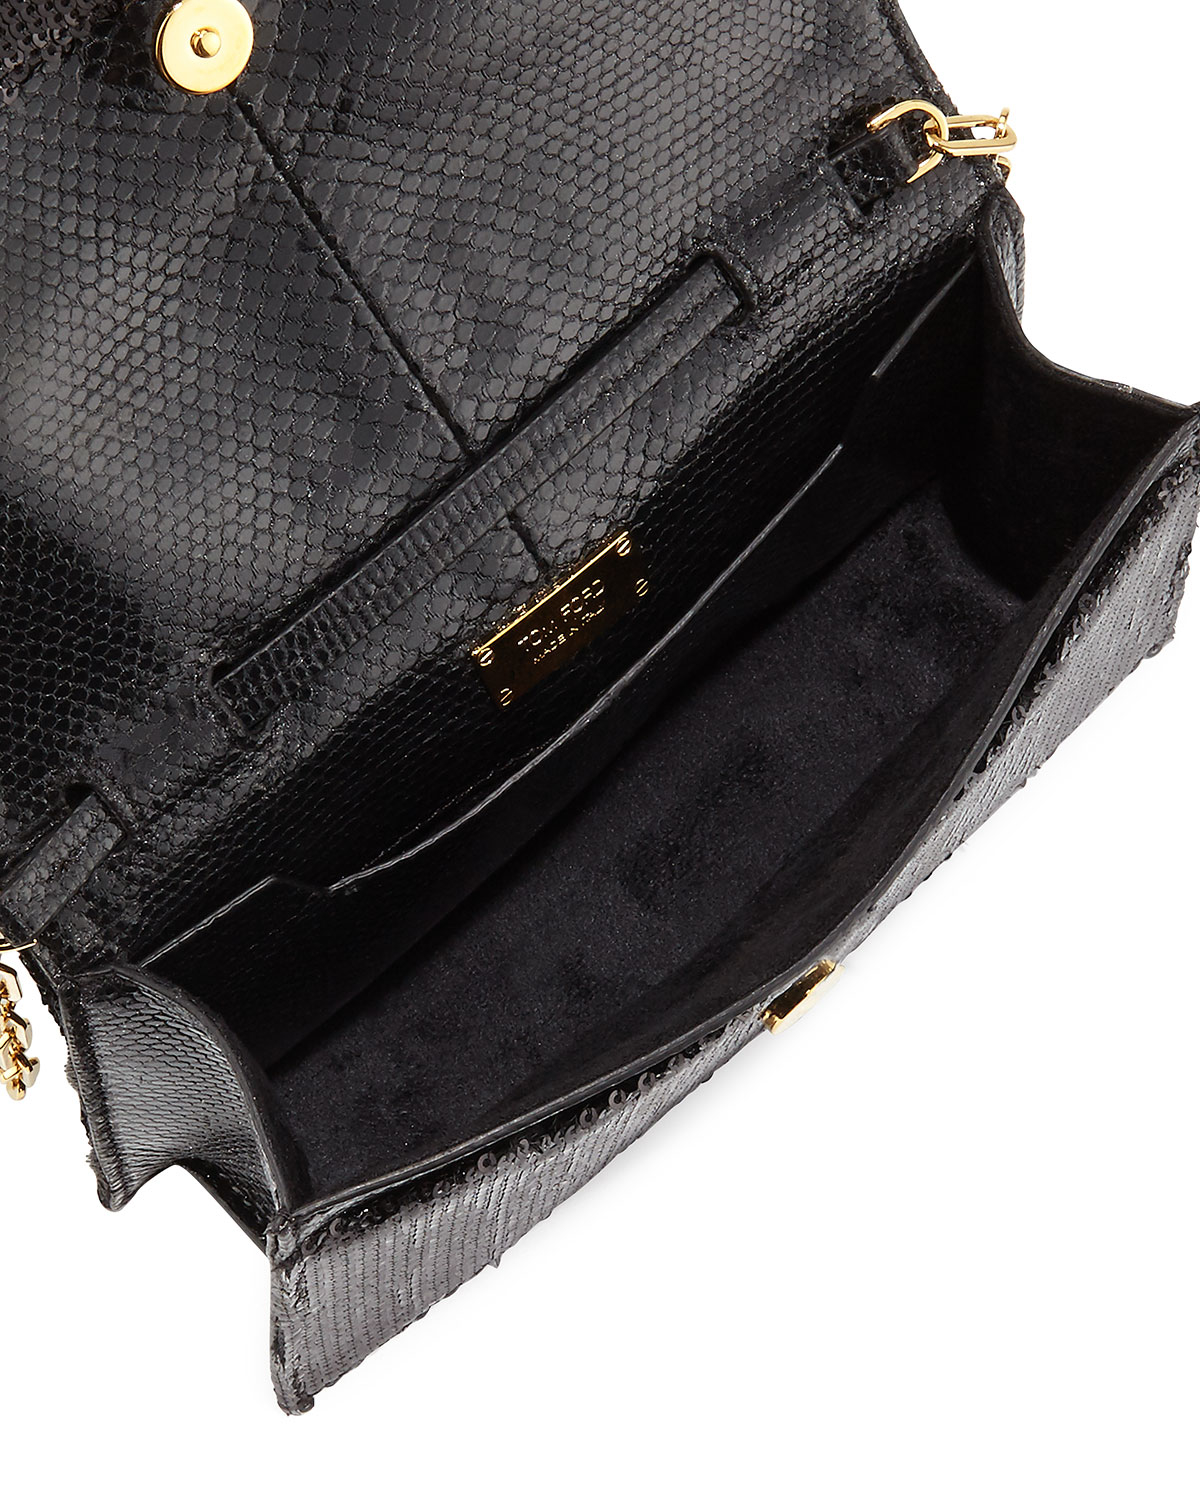 Tom Ford Small Zip-front Sequin Karung Crossbody Clutch Bag in Black - Lyst